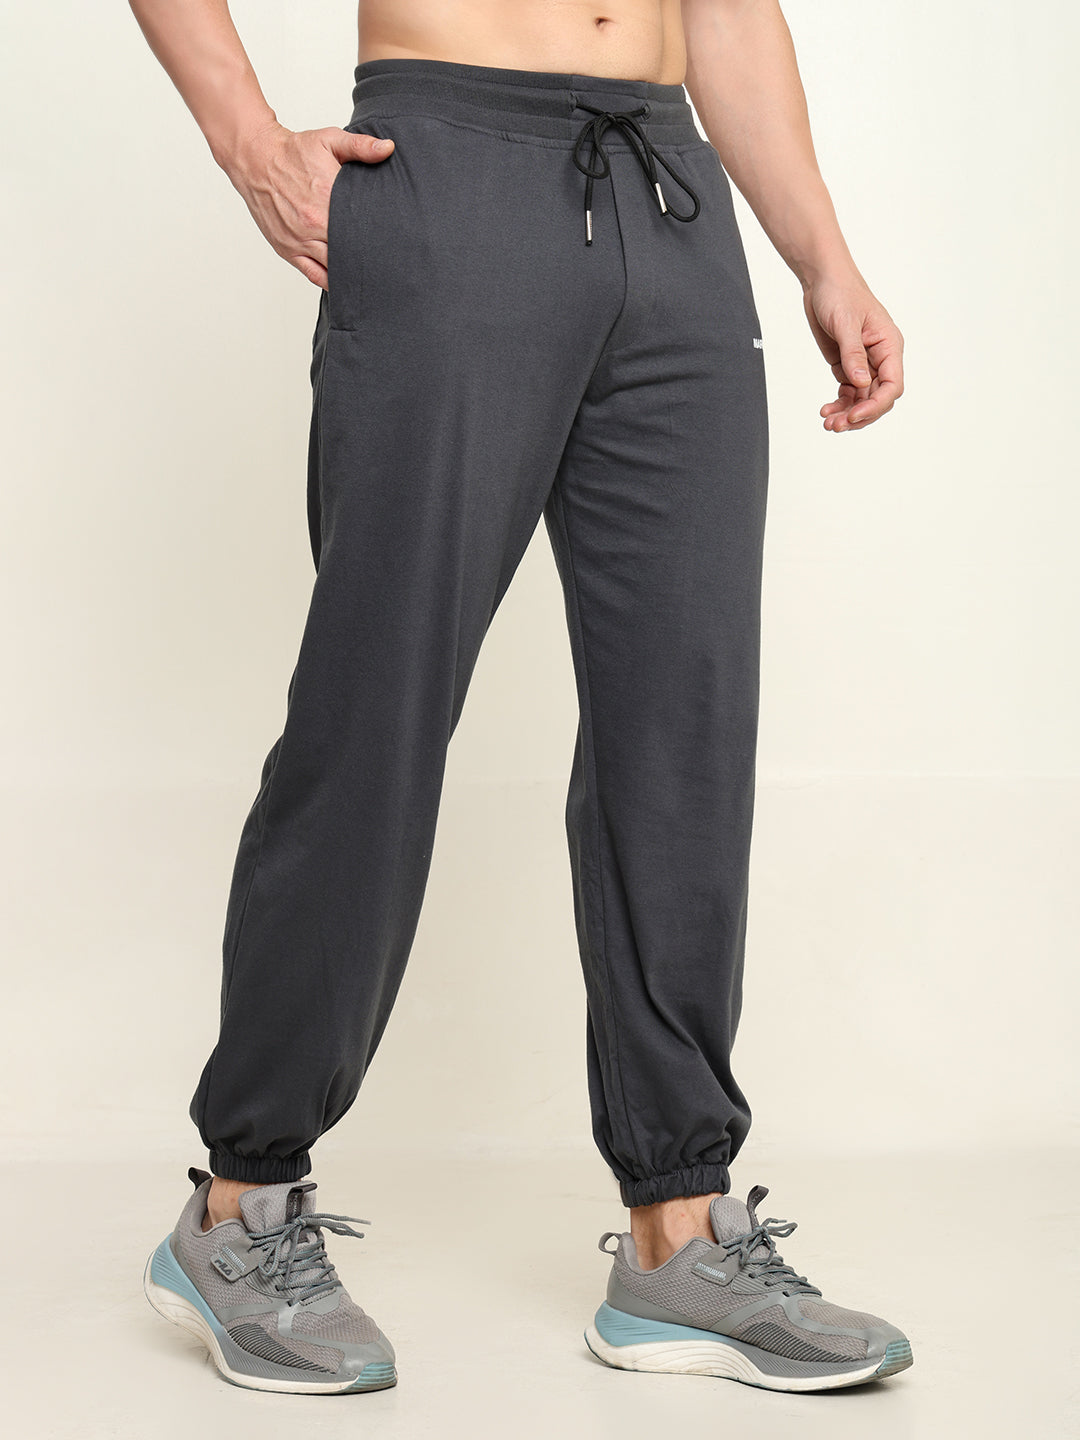 Breathable Loose Fit Cotton Track Pant for Men.(Charcoal Grey)